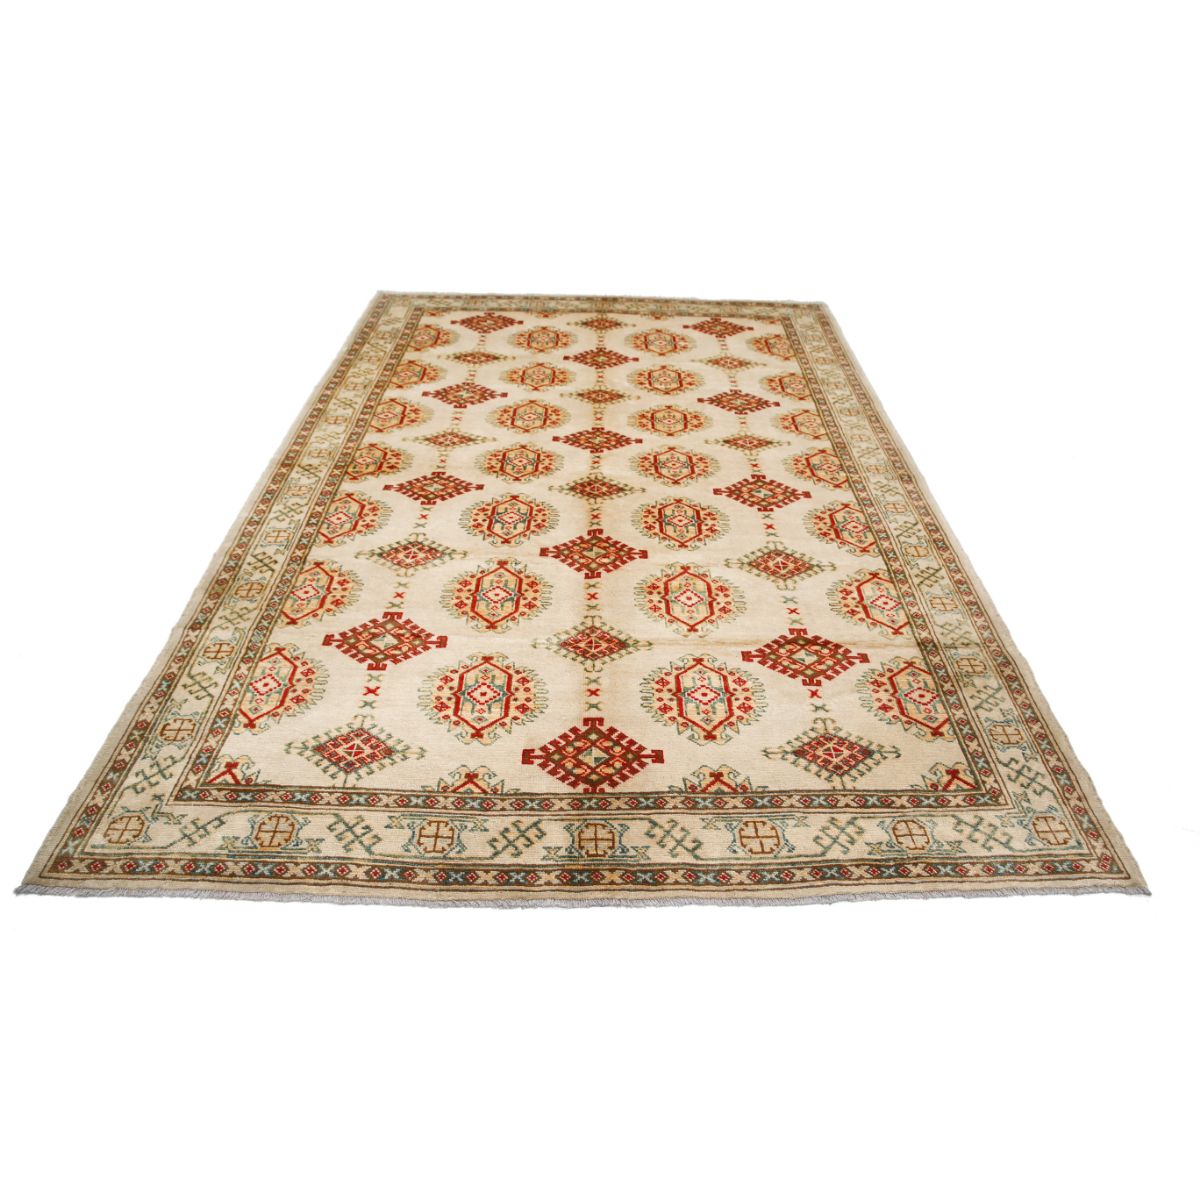 Revival 6' 7" X 9' 4" Wool Hand Knotted Rug